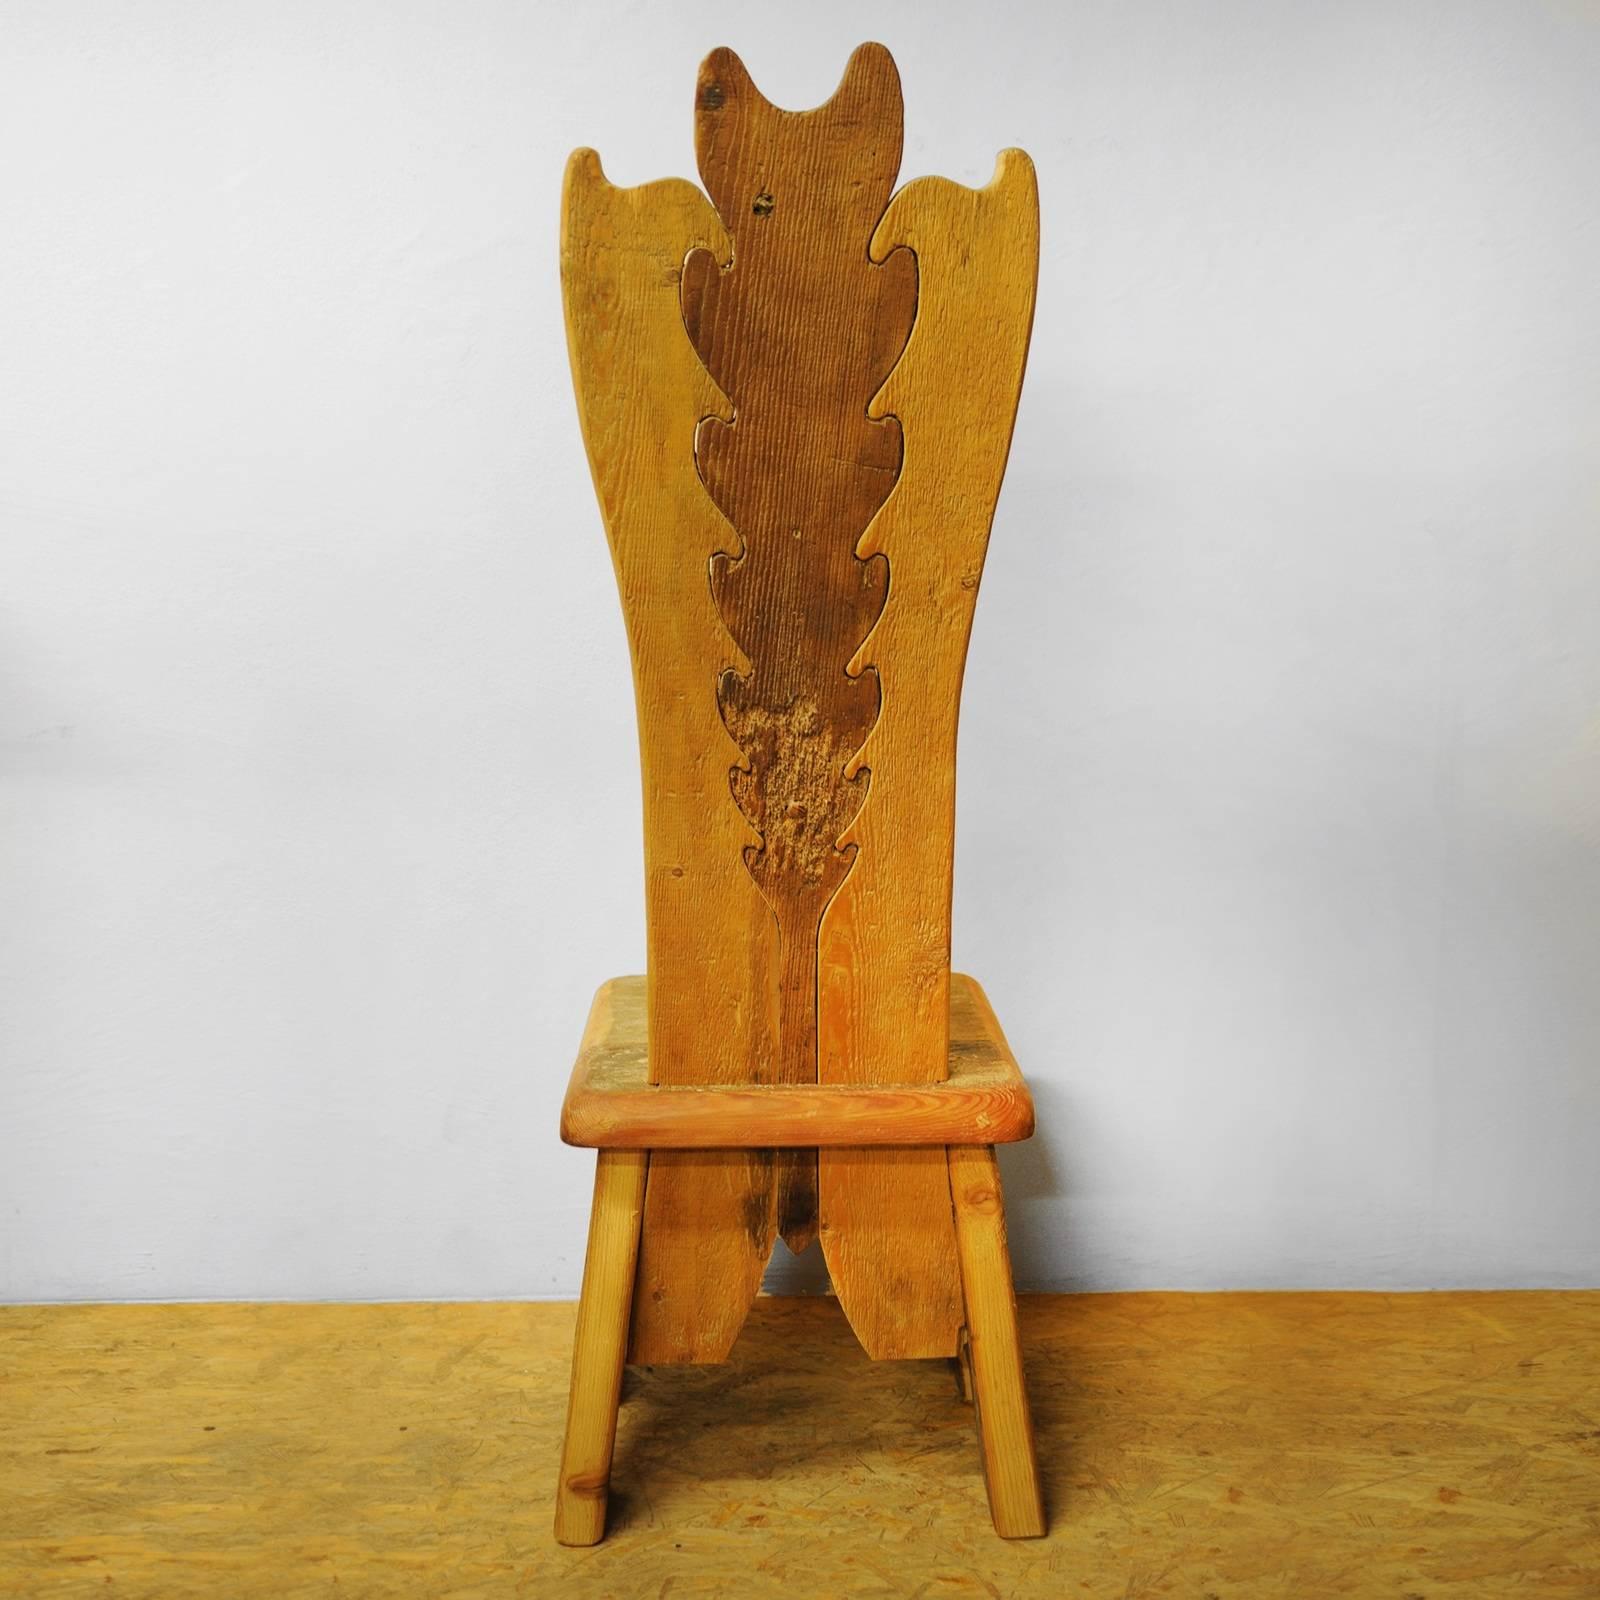 Part of the Throne collection of stunning chairs, this piece boast a stunning silhouette combining a sturdy and low base with an elongated backrest shaped like a stylized leaf. Mixing reclaimed larch, Swiss pine, fir, and pine taken from old 16th